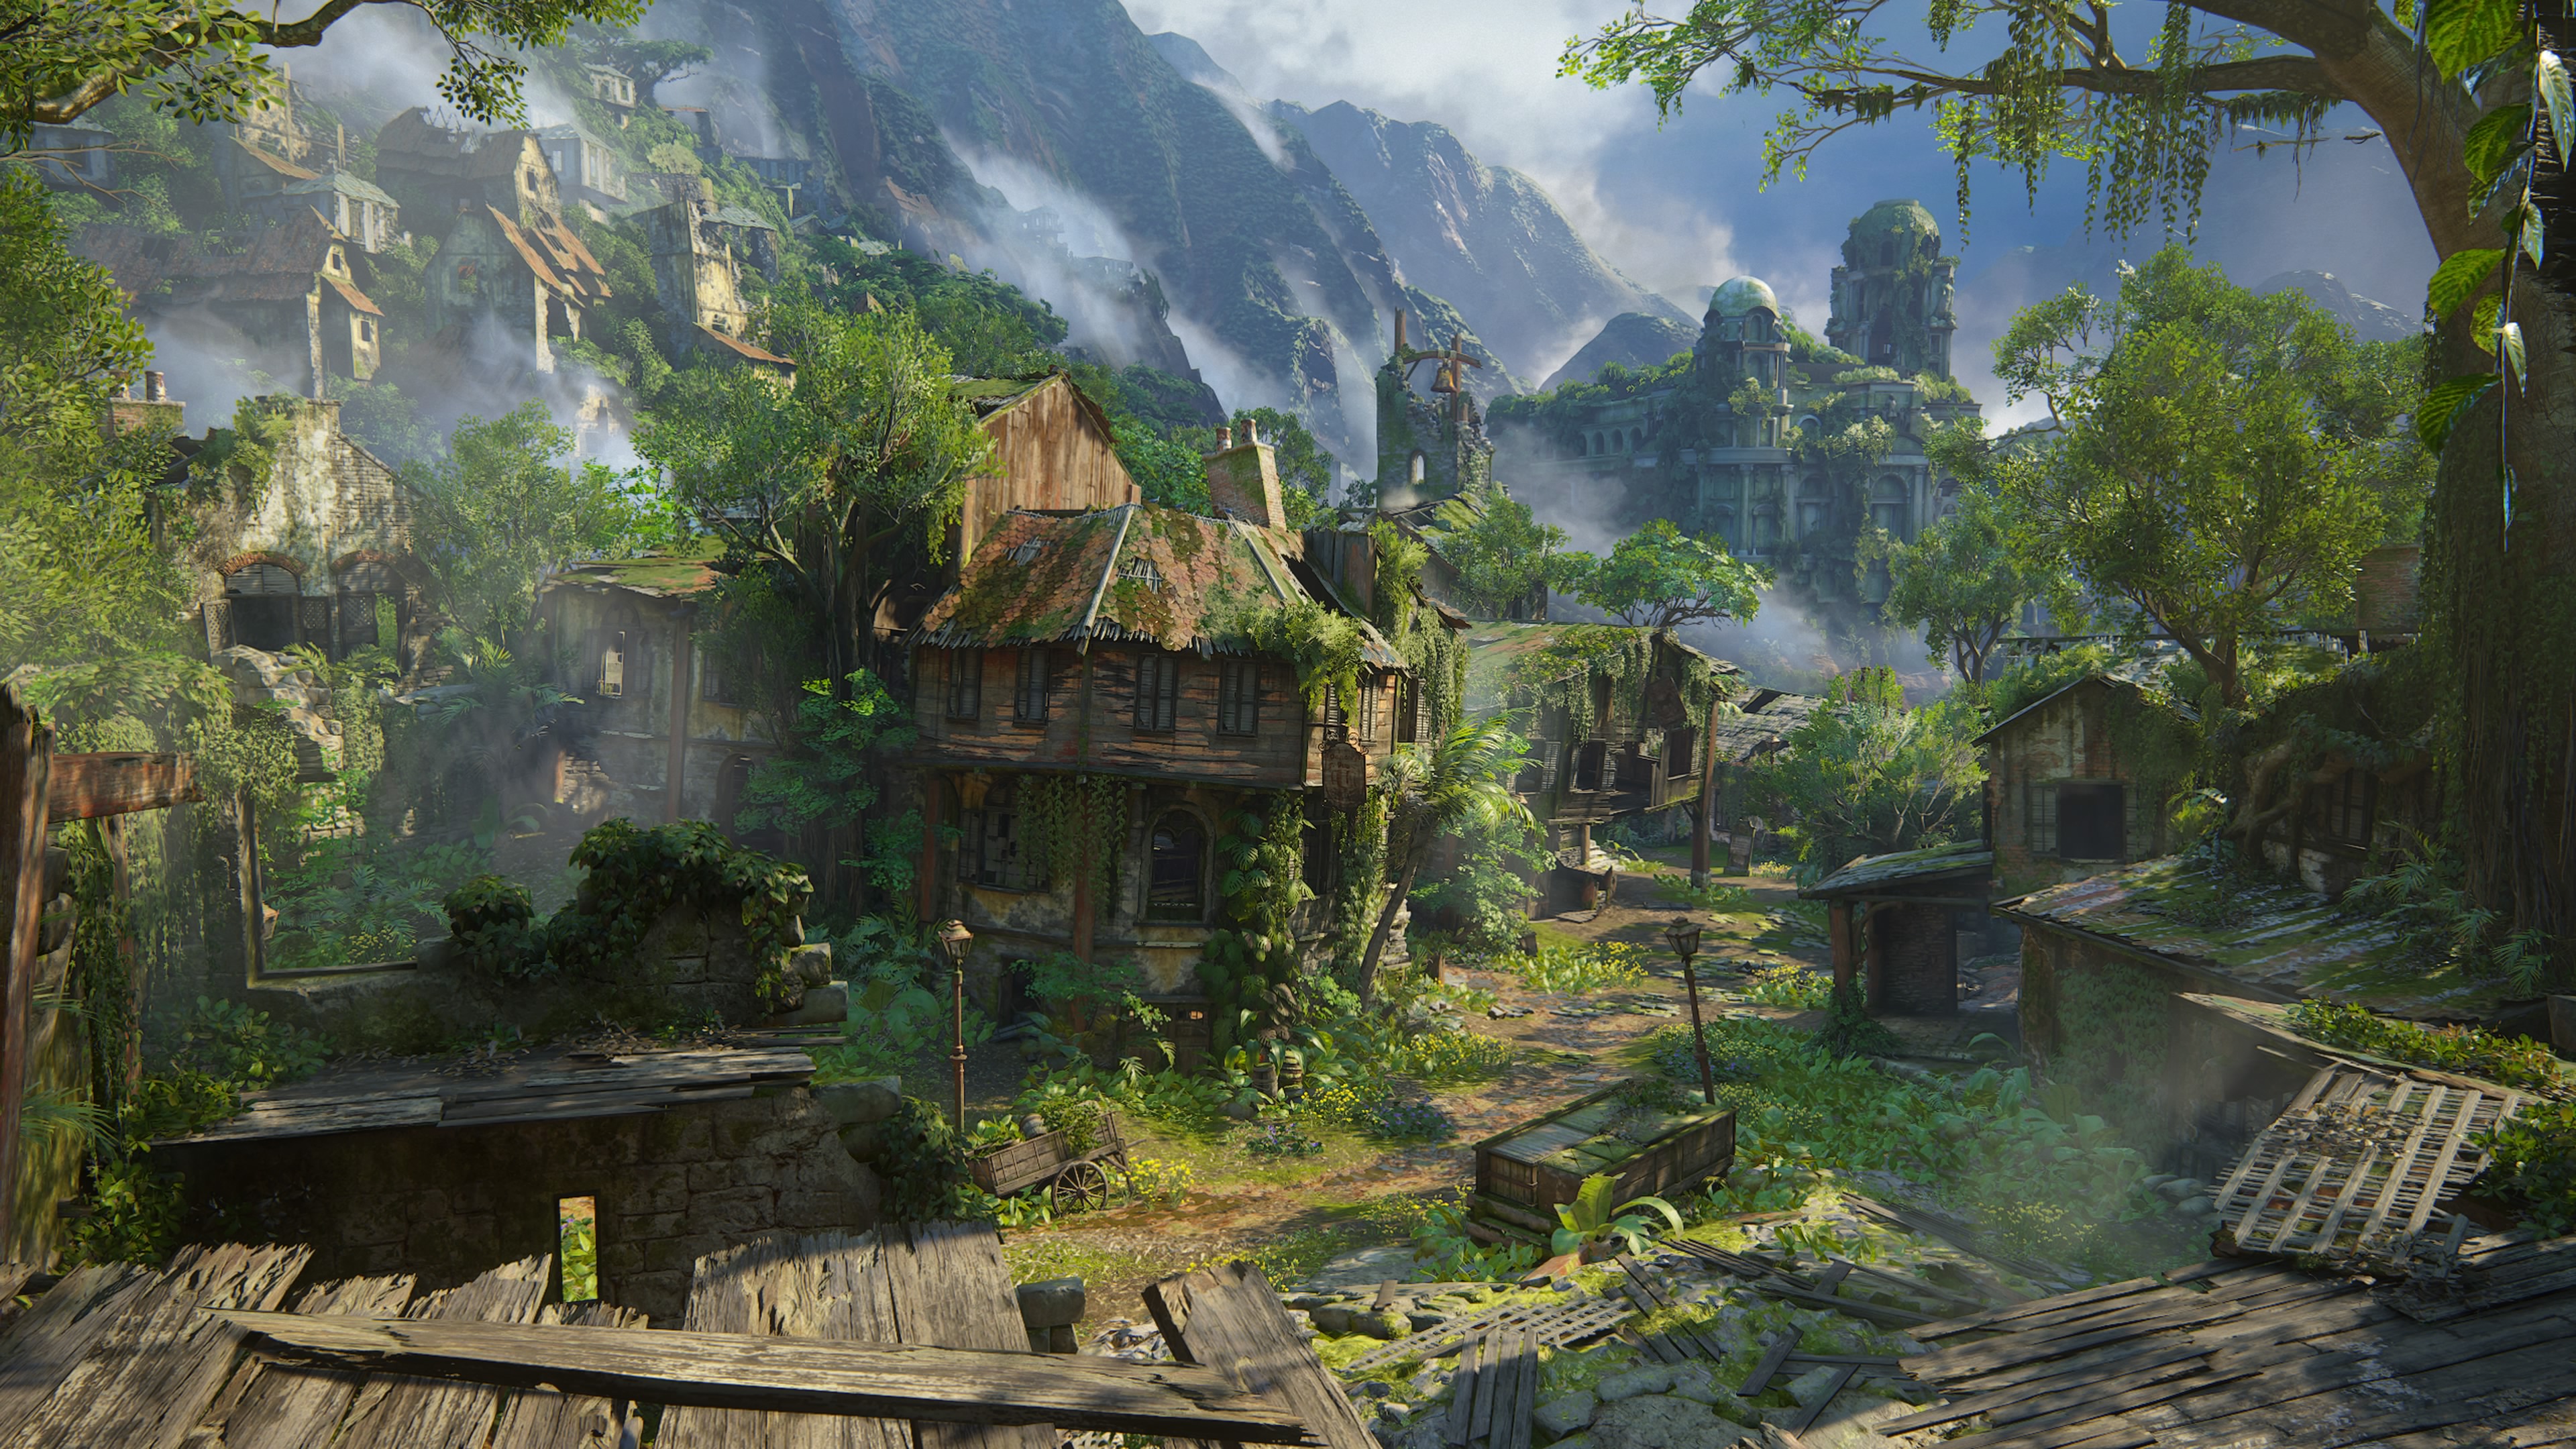 Wallpaper, uncharted video games, nature, PlayStation overgrown, ruins, old building, harvest, city 3840x2160